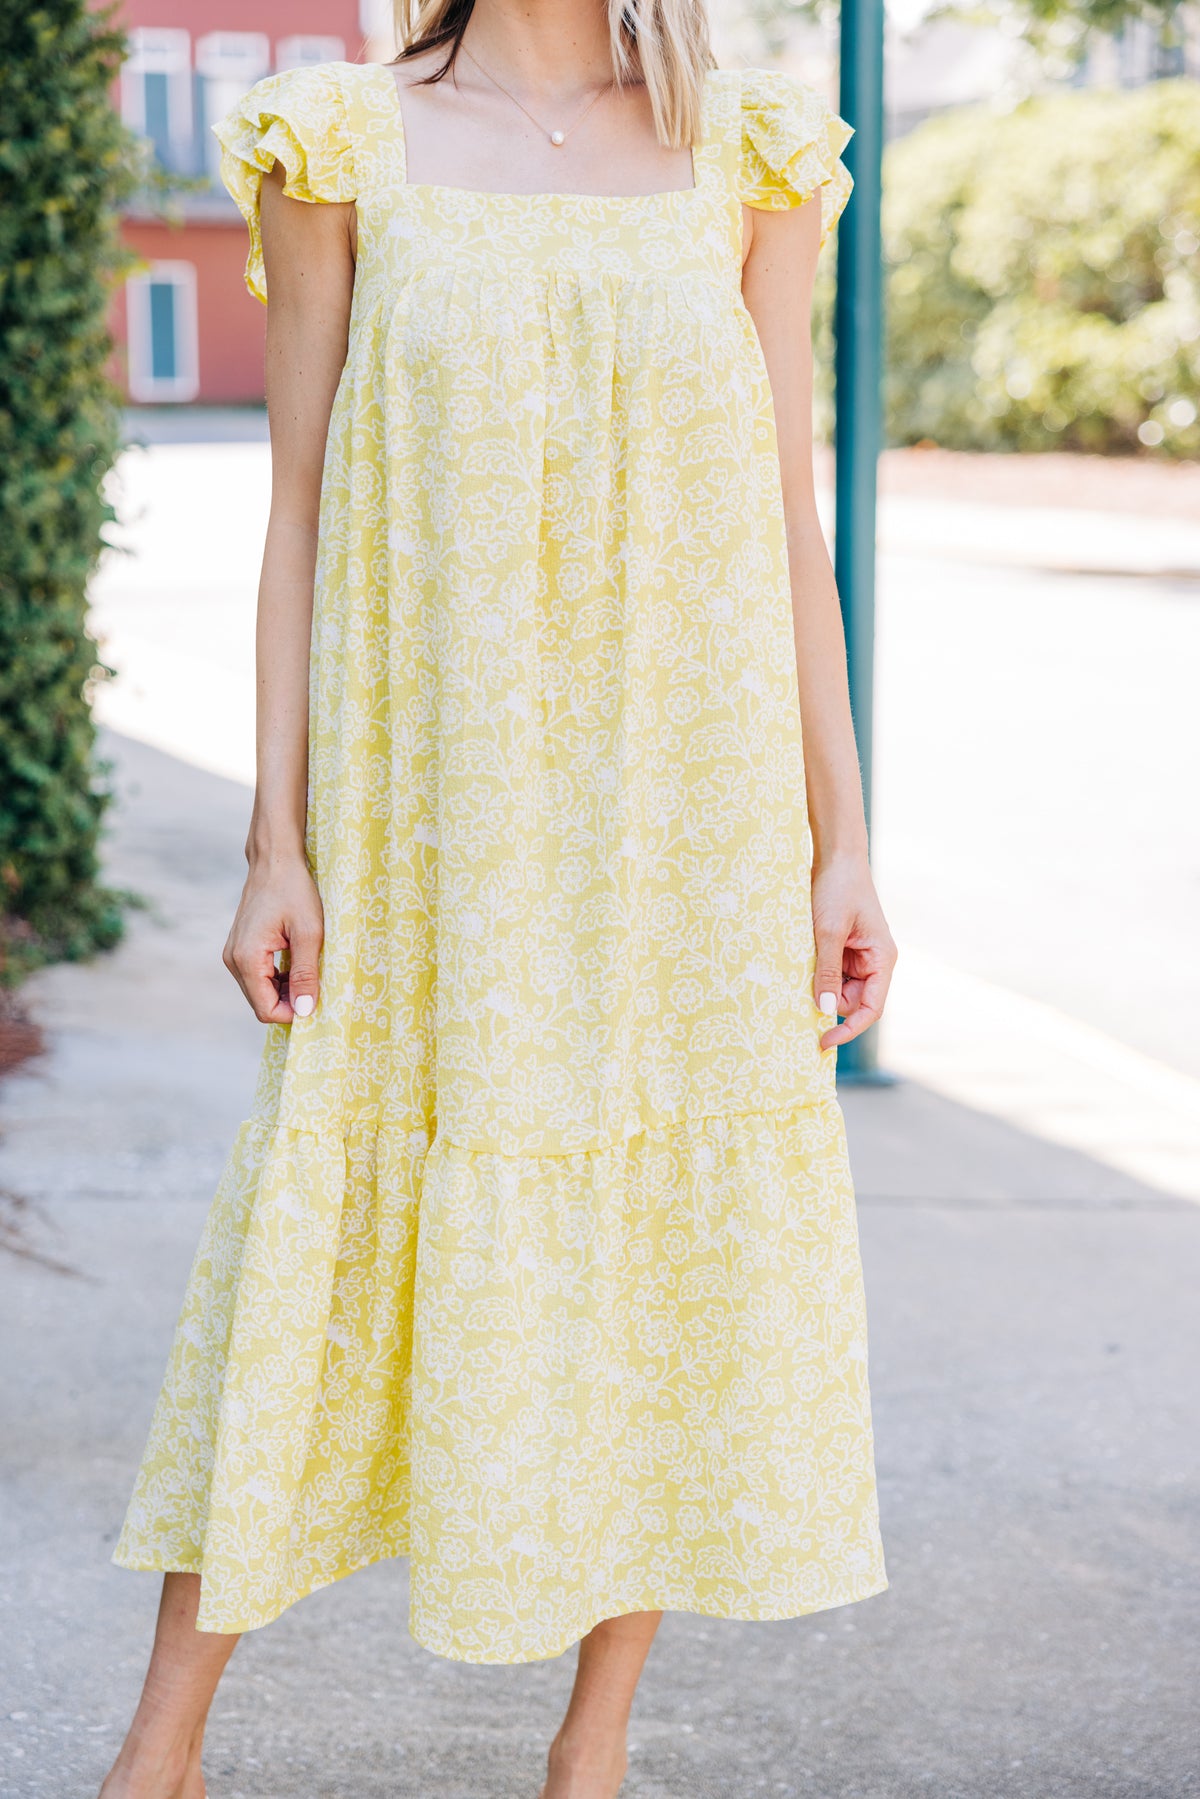 Easy To See Kiwi Yellow Floral Midi Dress – Shop the Mint